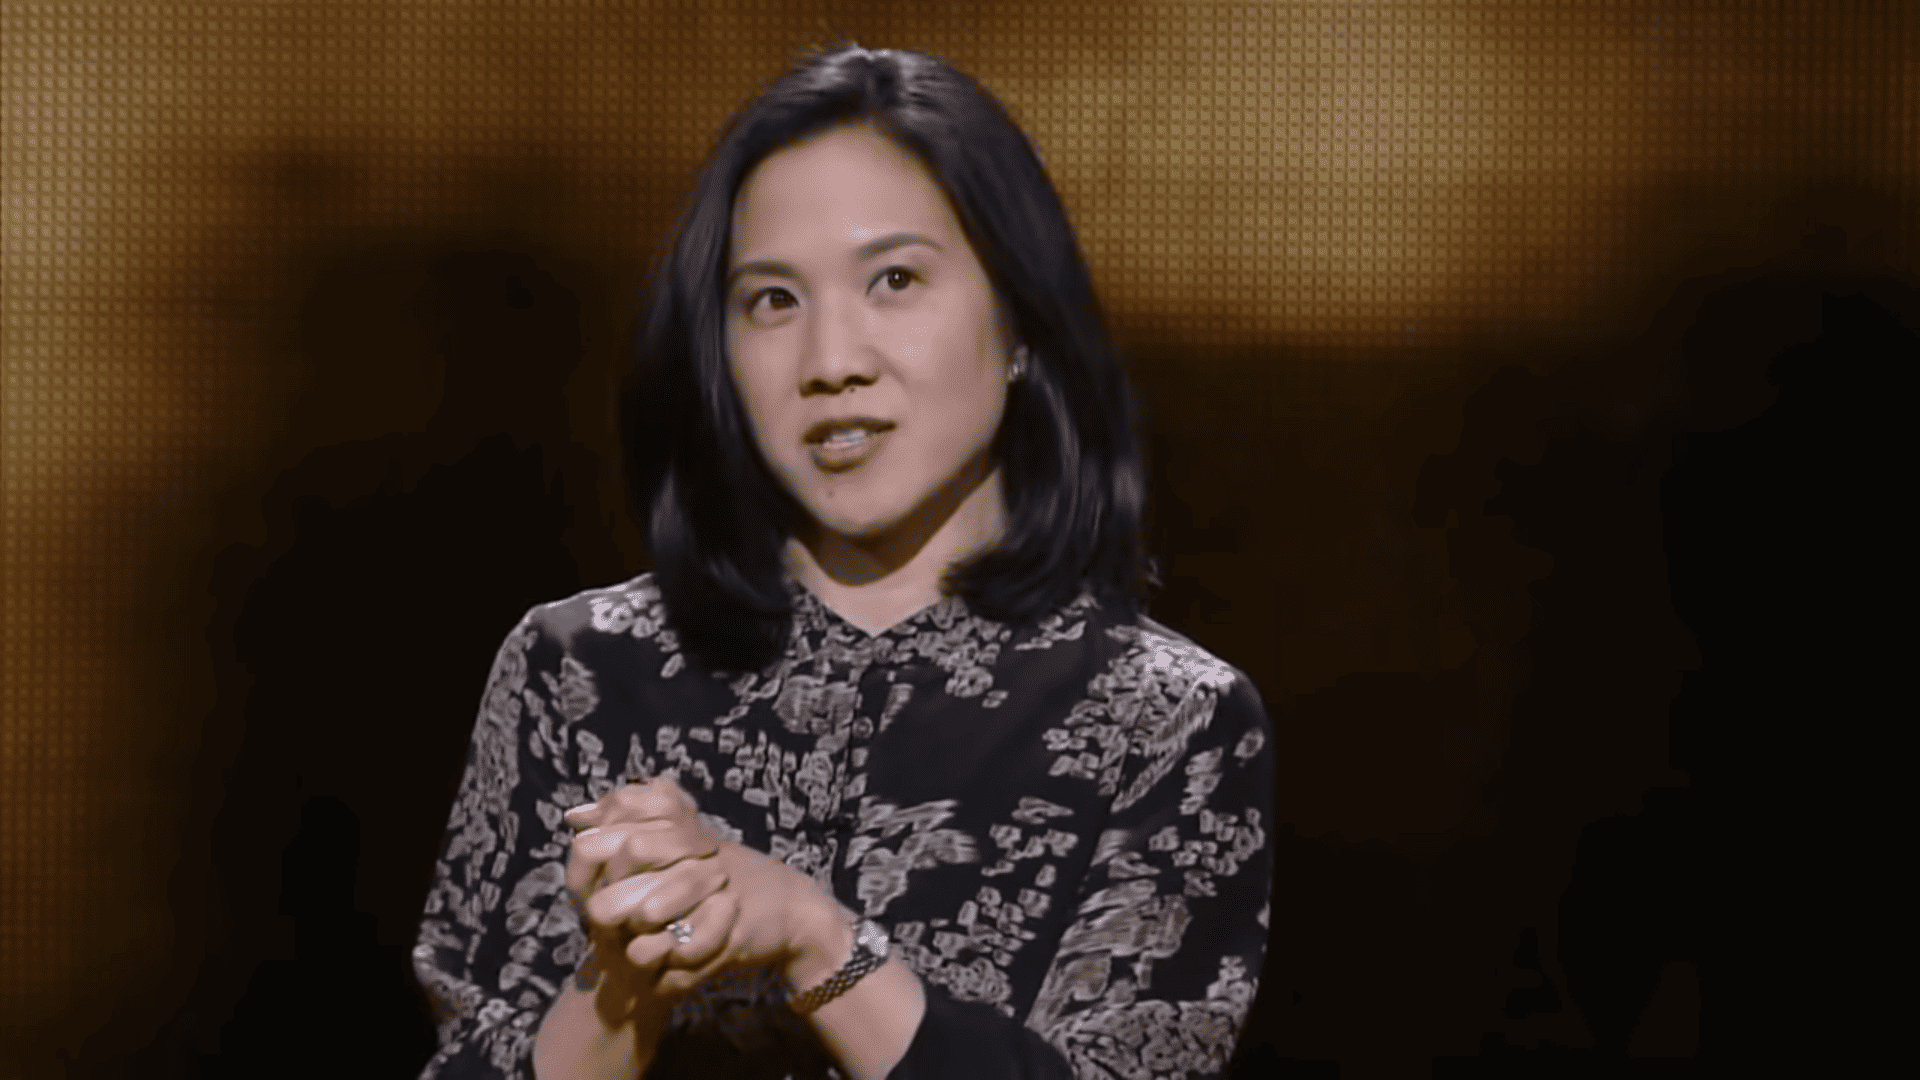 Angela Duckworth, a woman with black hair, on the TED stage giving a talk